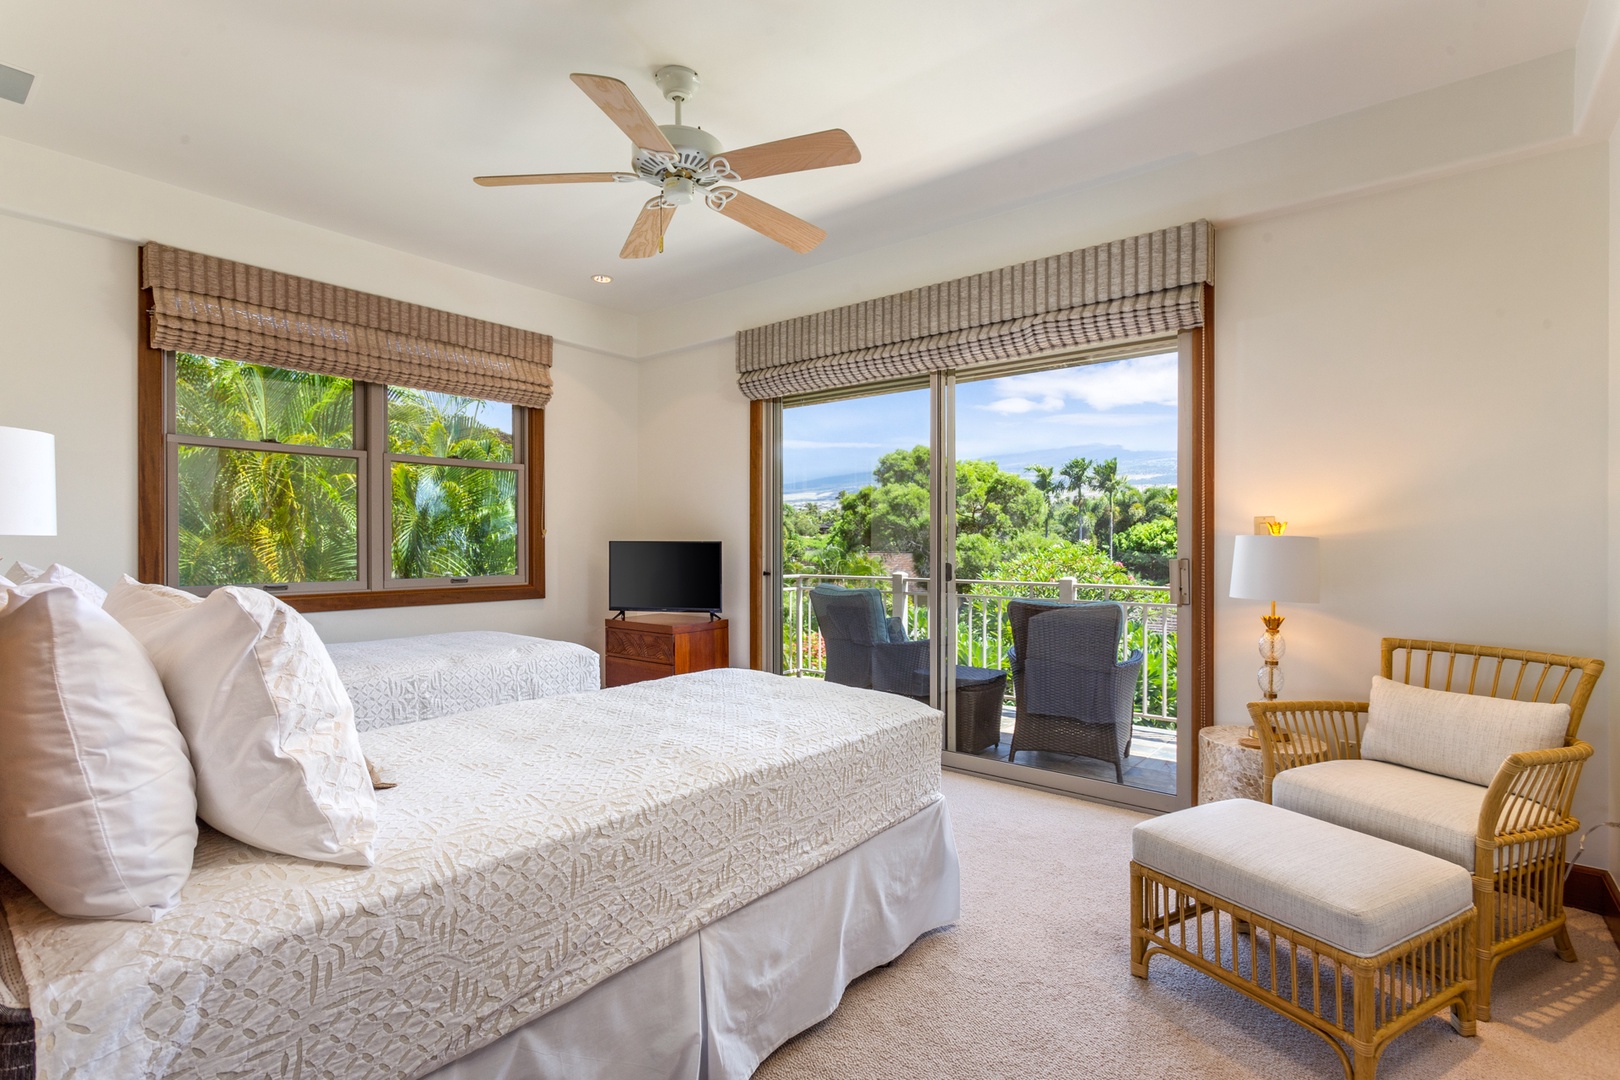 Kailua Kona Vacation Rentals, OFB 3BD Ka'Ulu Villa (129D) at Four Seasons Resort at Hualalai - Third bedroom (upstairs) with two twin beds (can convert to a king upon request), private balcony and adjacent bath.